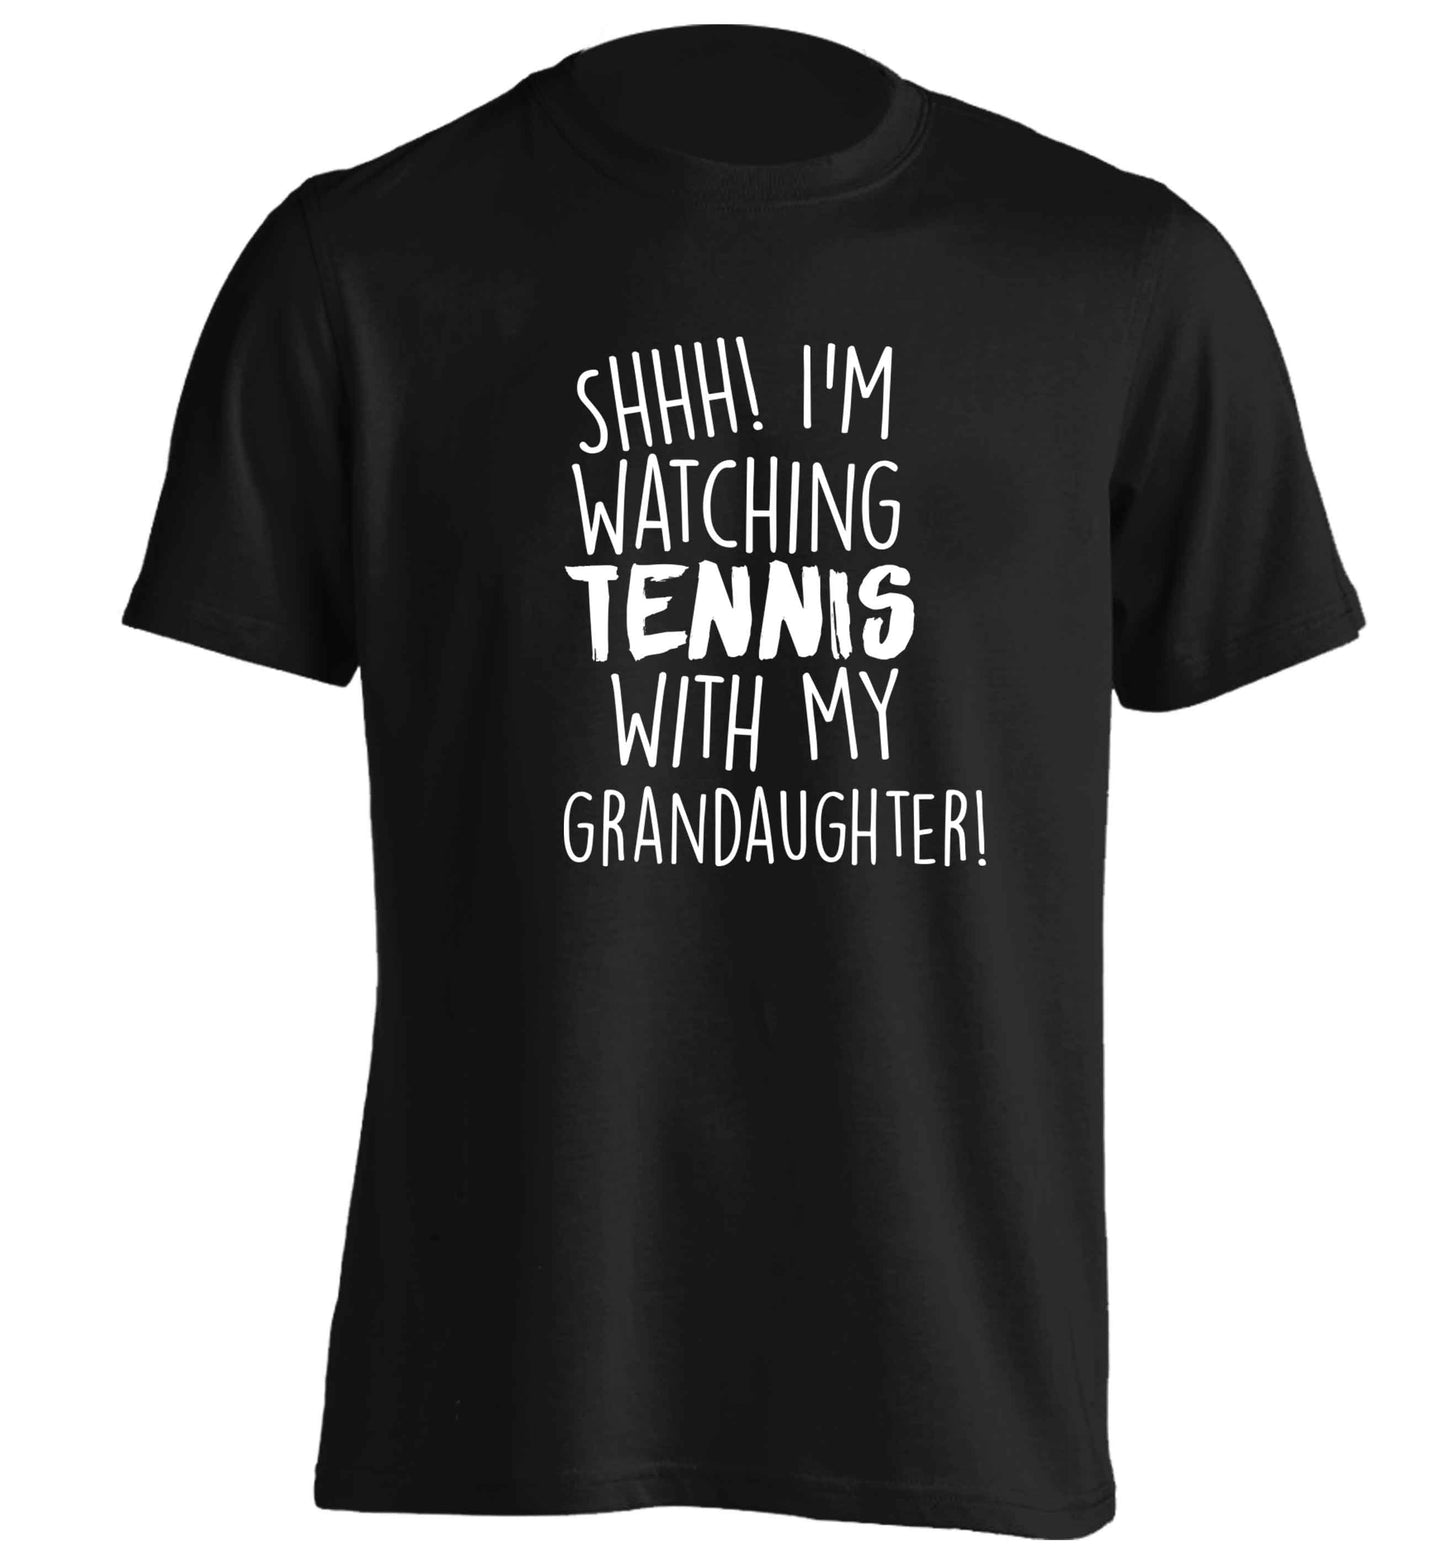 Shh! I'm watching tennis with my granddaughter! adults unisex black Tshirt 2XL